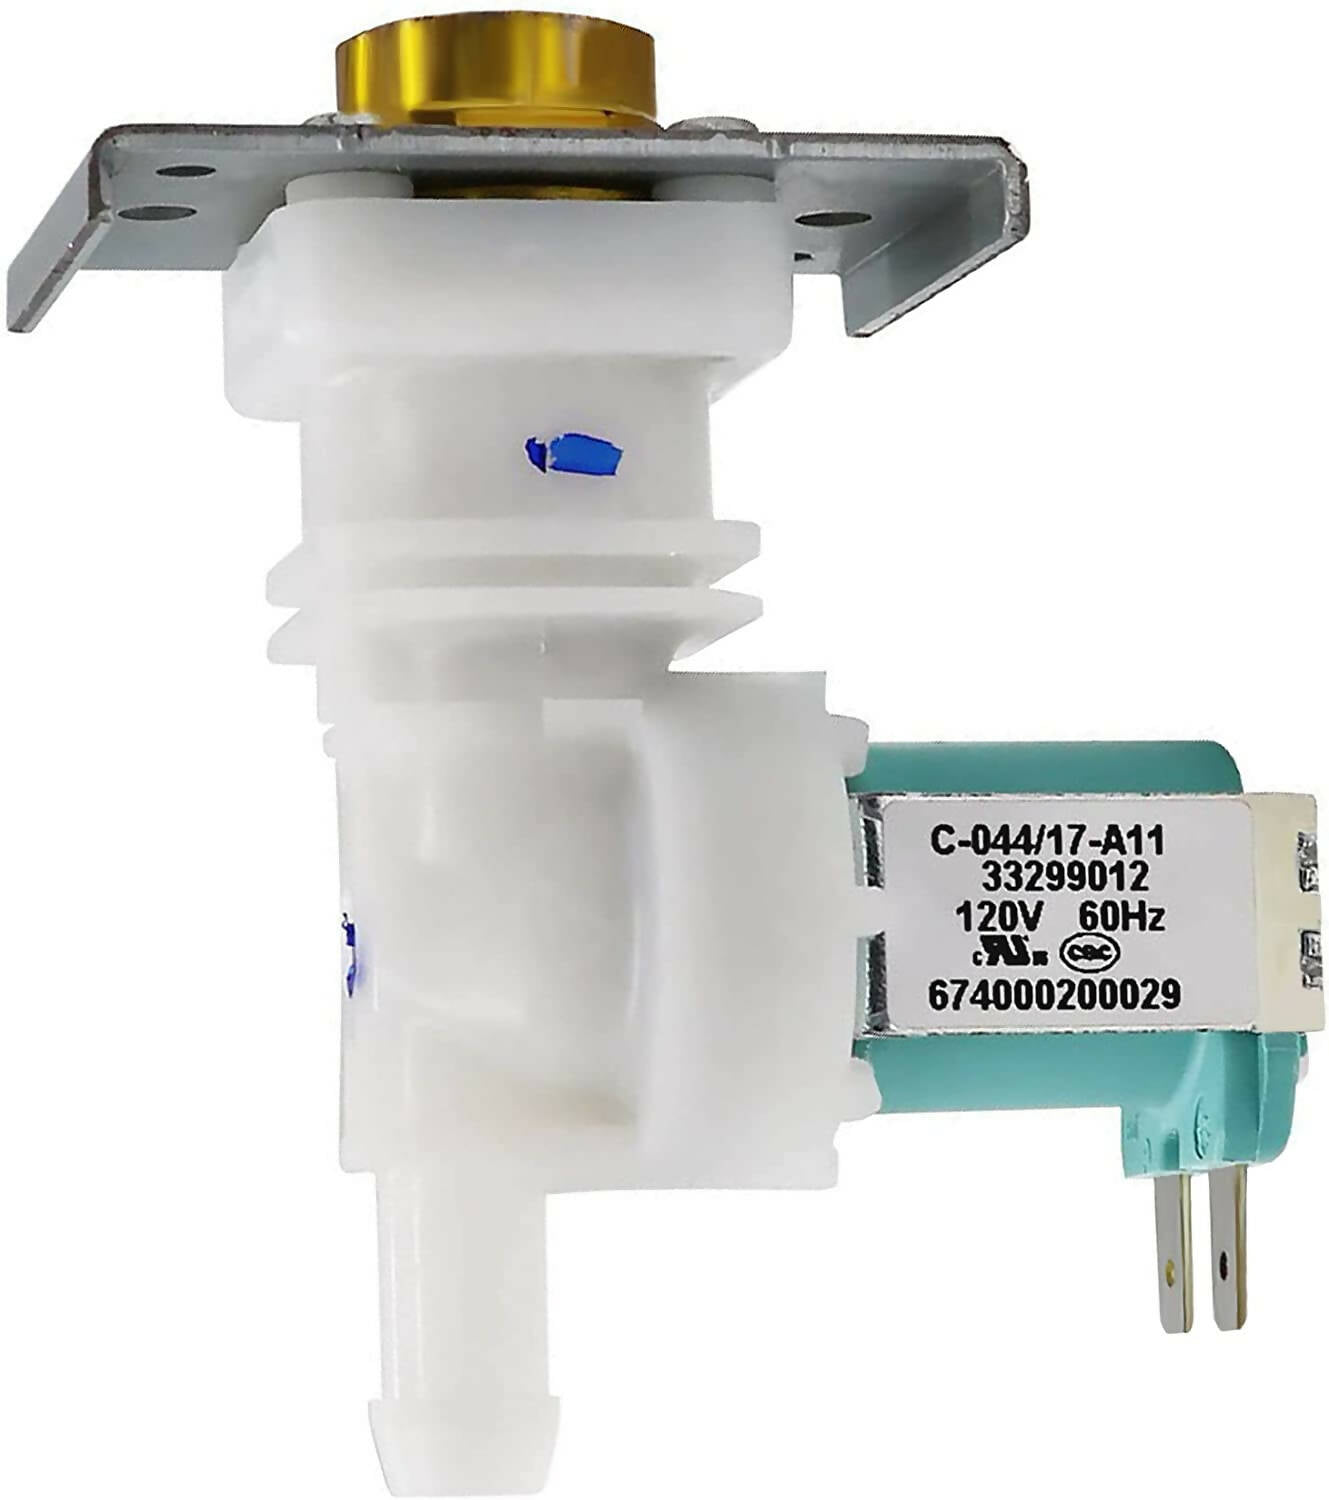 Samsung Dishwasher Water Inlet Valve - DD62-00084A, Replaces: 2692215 AP5178218 PS4222448 EAP4222448 PD00002158